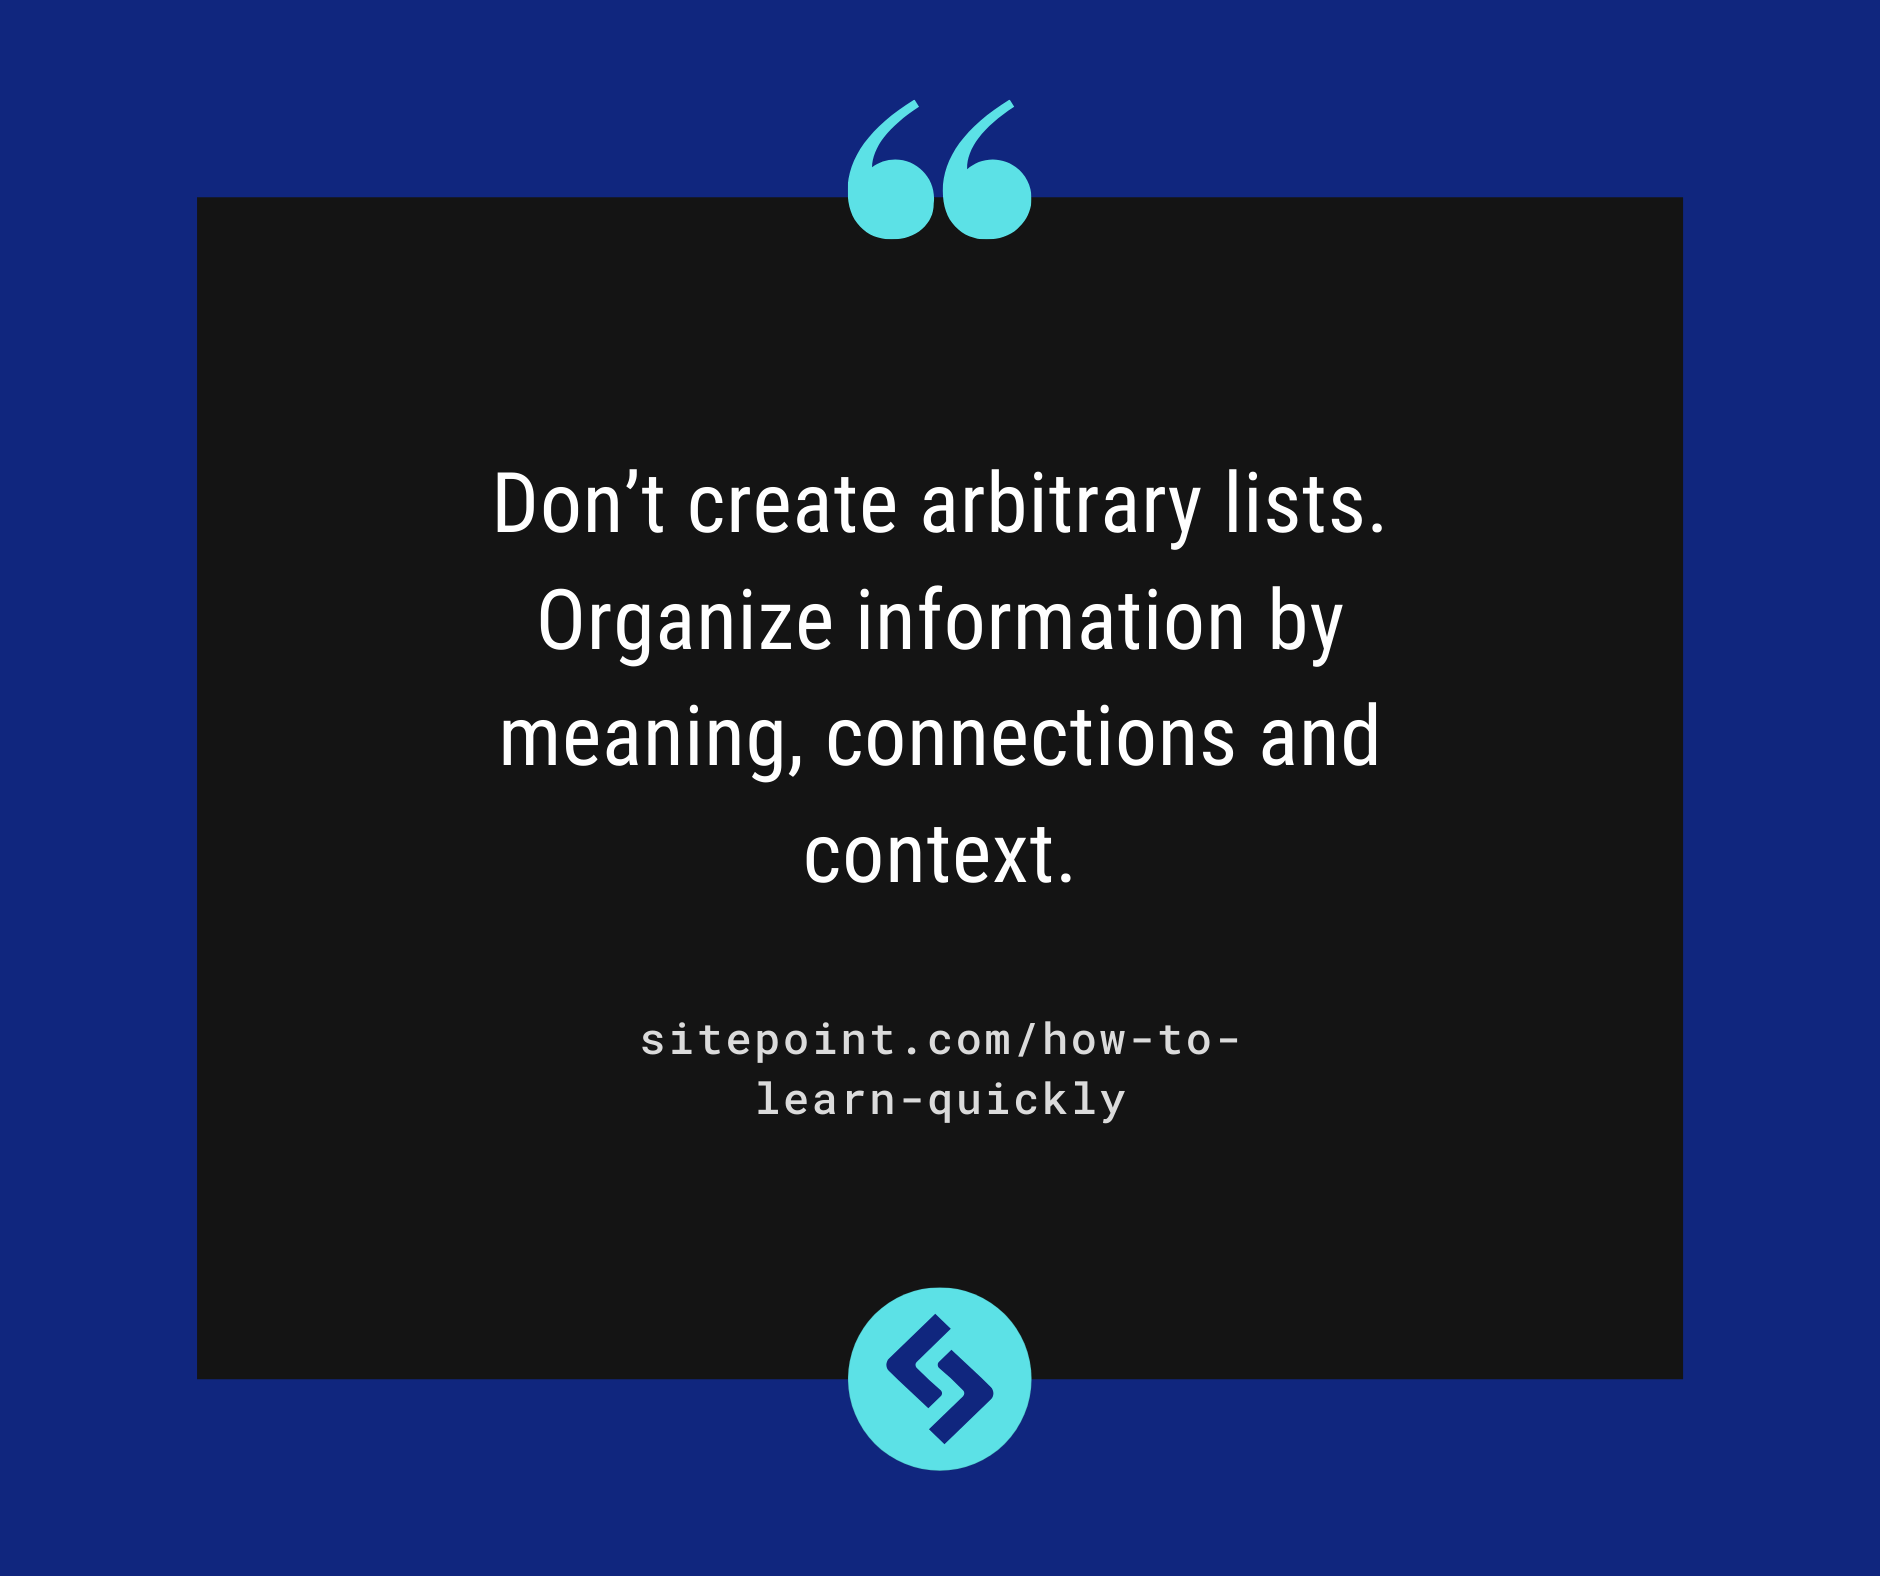 Don’t create arbitrary lists. Organize information by meaning, connections and context.